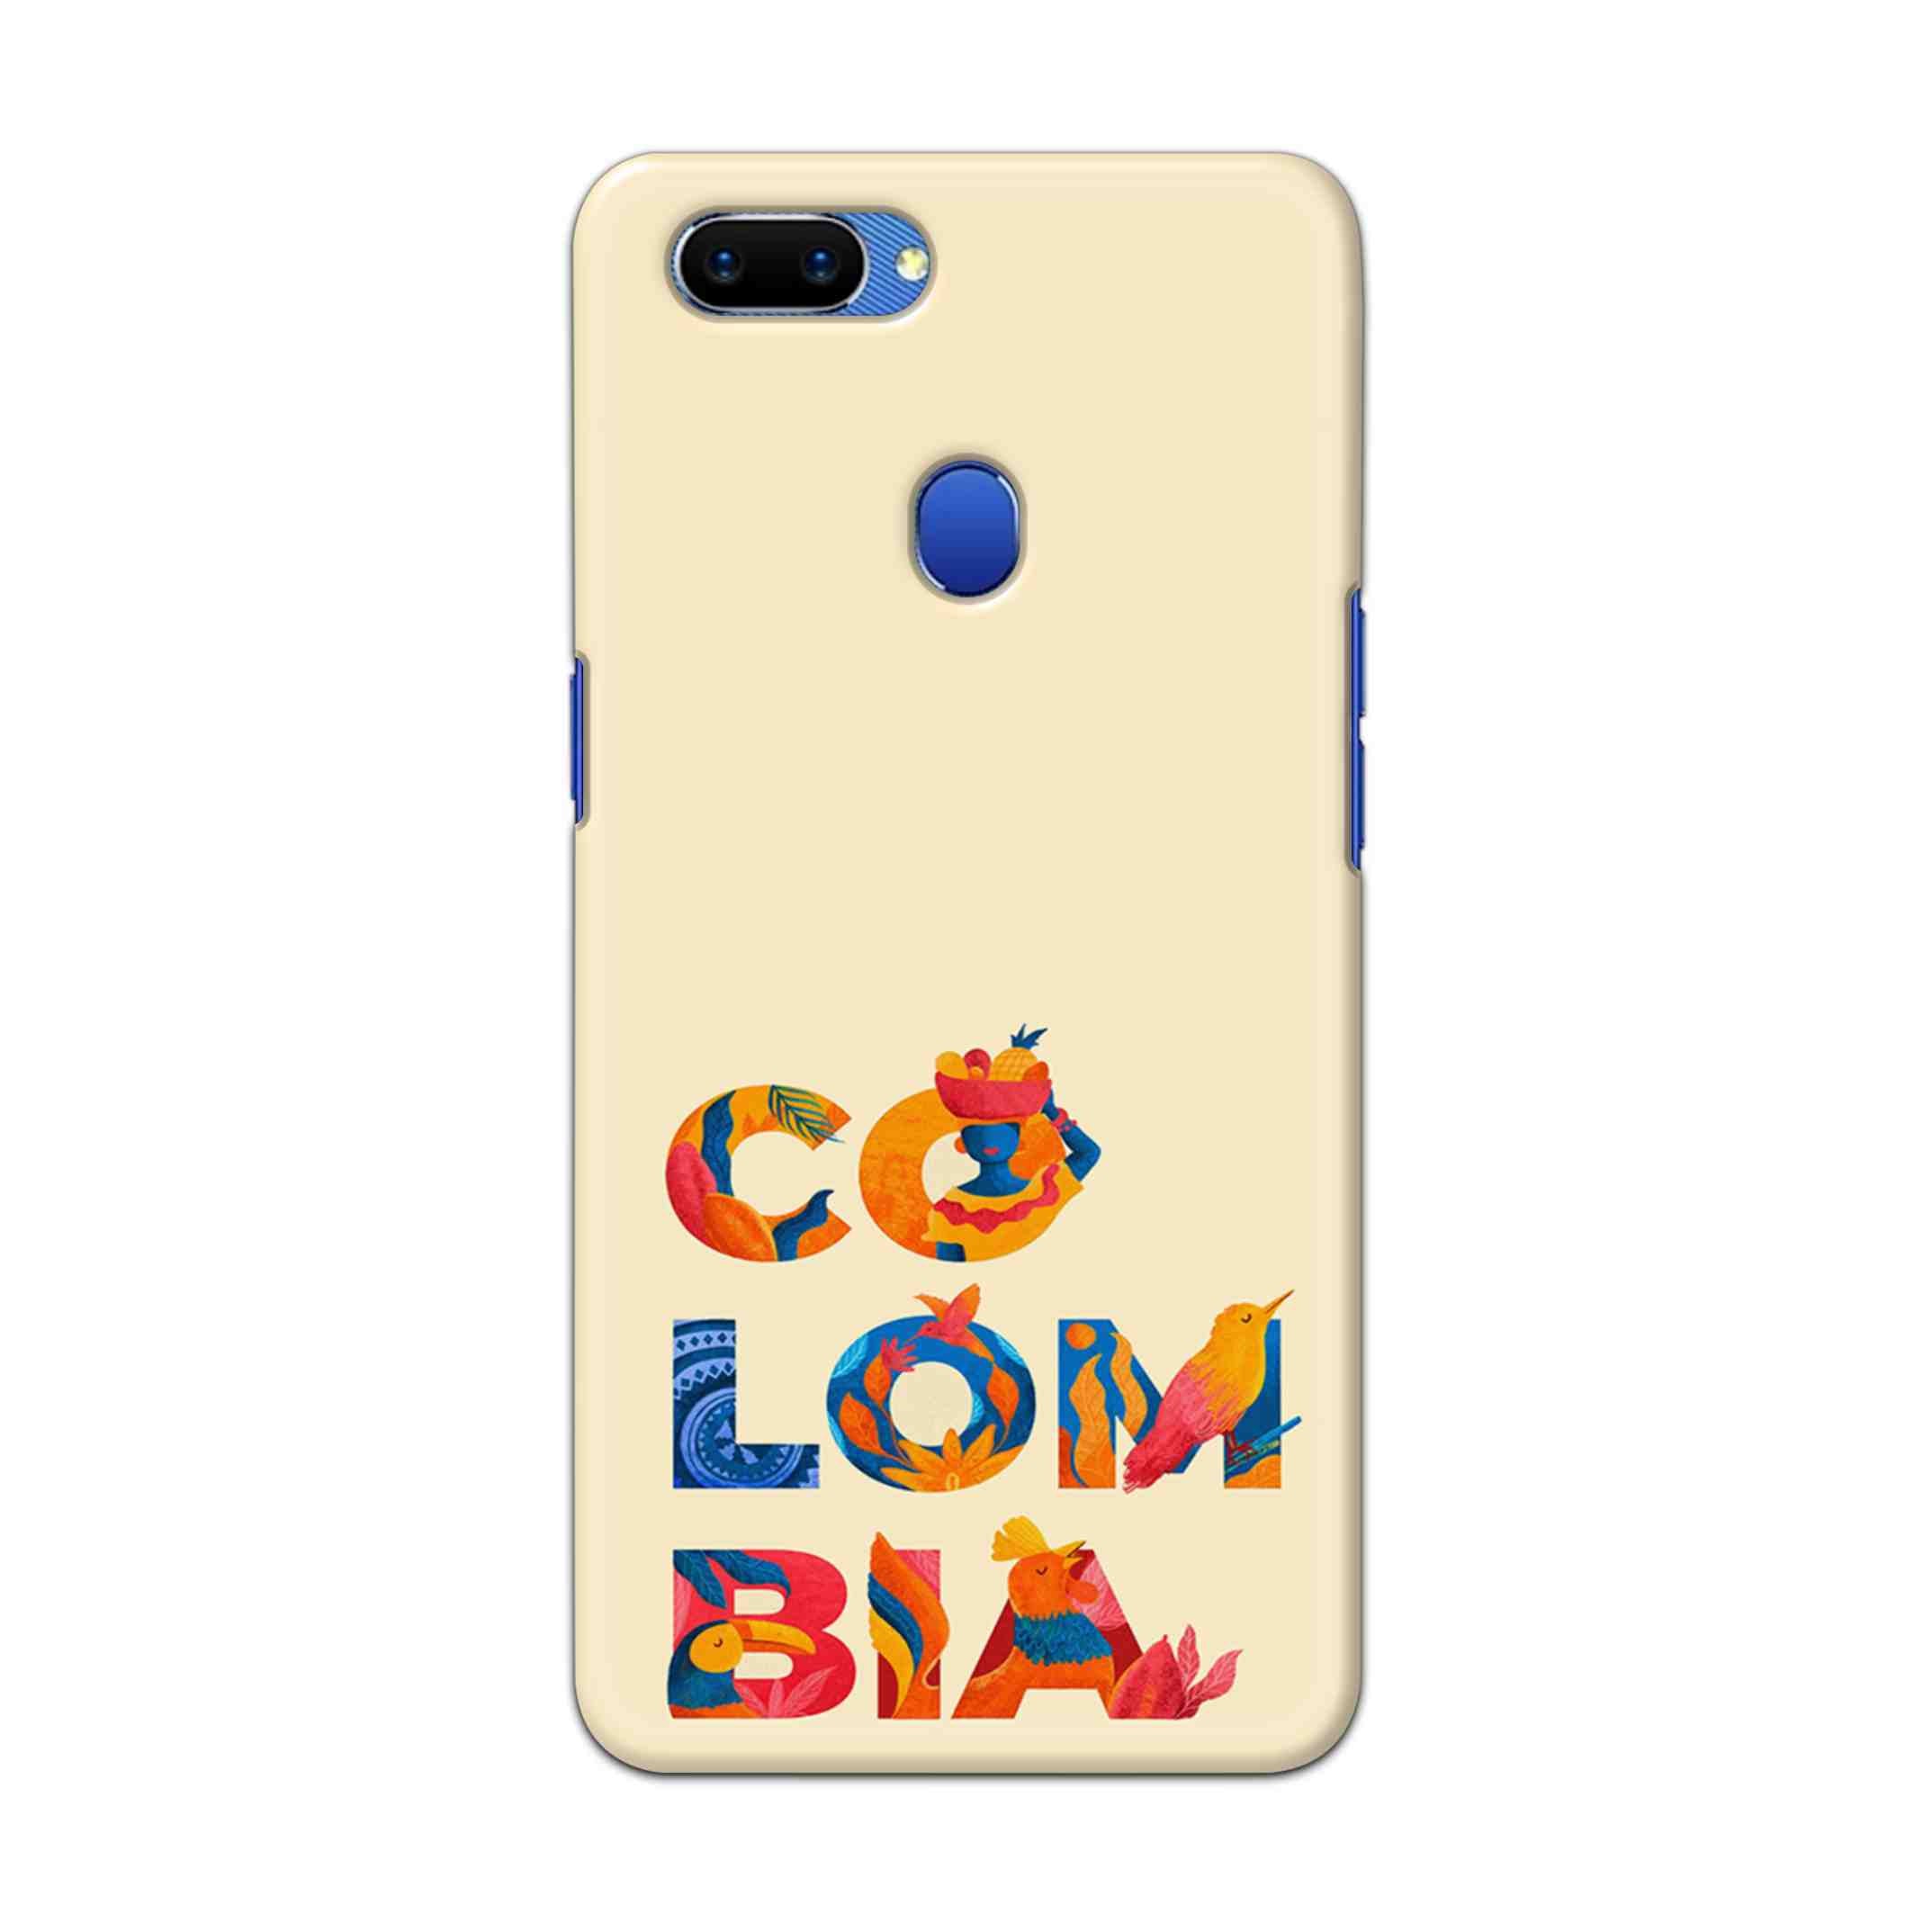 Buy Colombia Hard Back Mobile Phone Case Cover For Oppo A5 Online